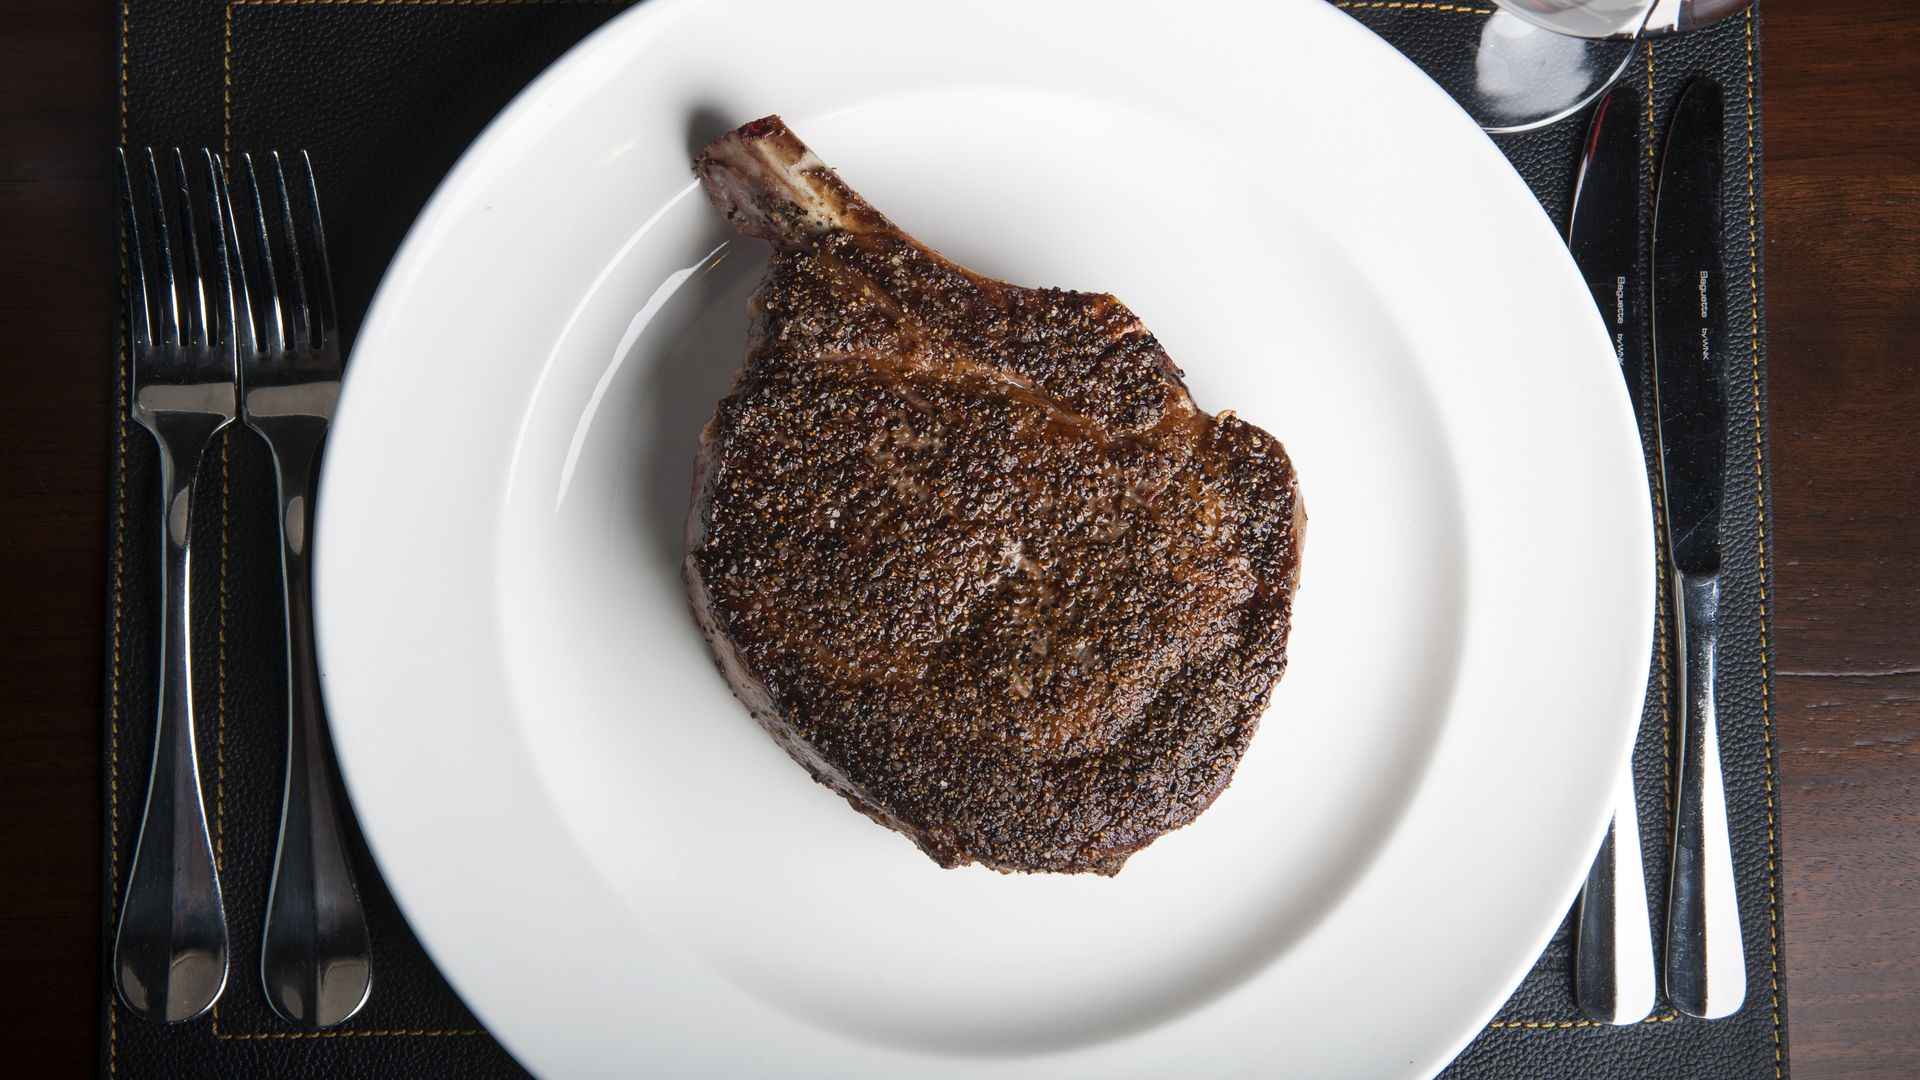  The rib-eye is photographed at Del Frisco's Double Eagle Steak House September 29, 2014 in Washington, DC. (Photo by Katherine Frey/The Washington Post via Getty Images)